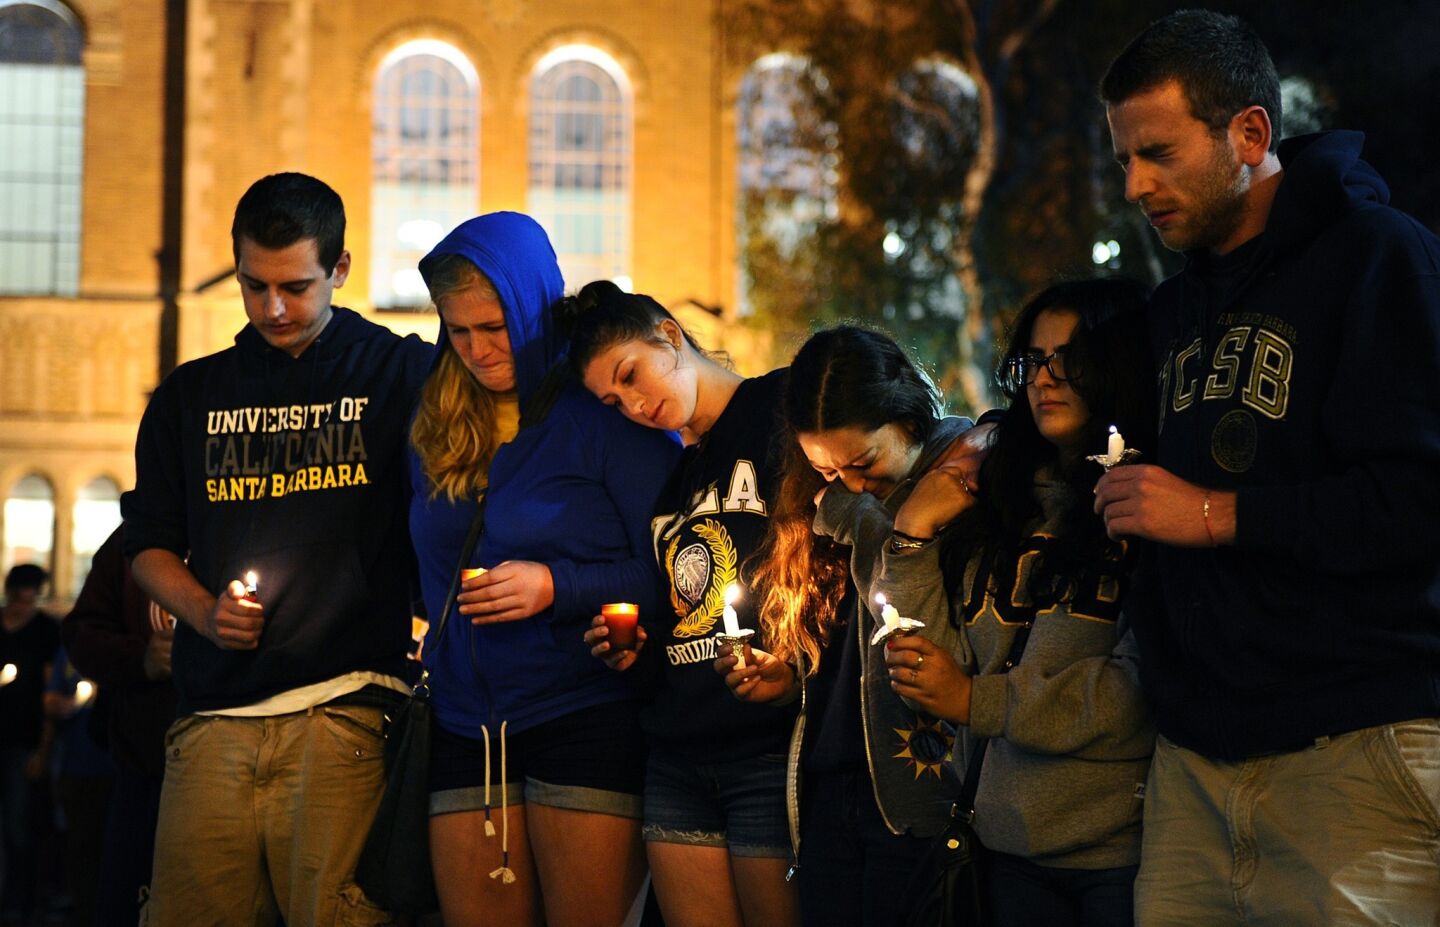 Students gather near Royce Hall at UCLA to pay tribute to the Isla Vista victims during a candlelight vigil Monday.